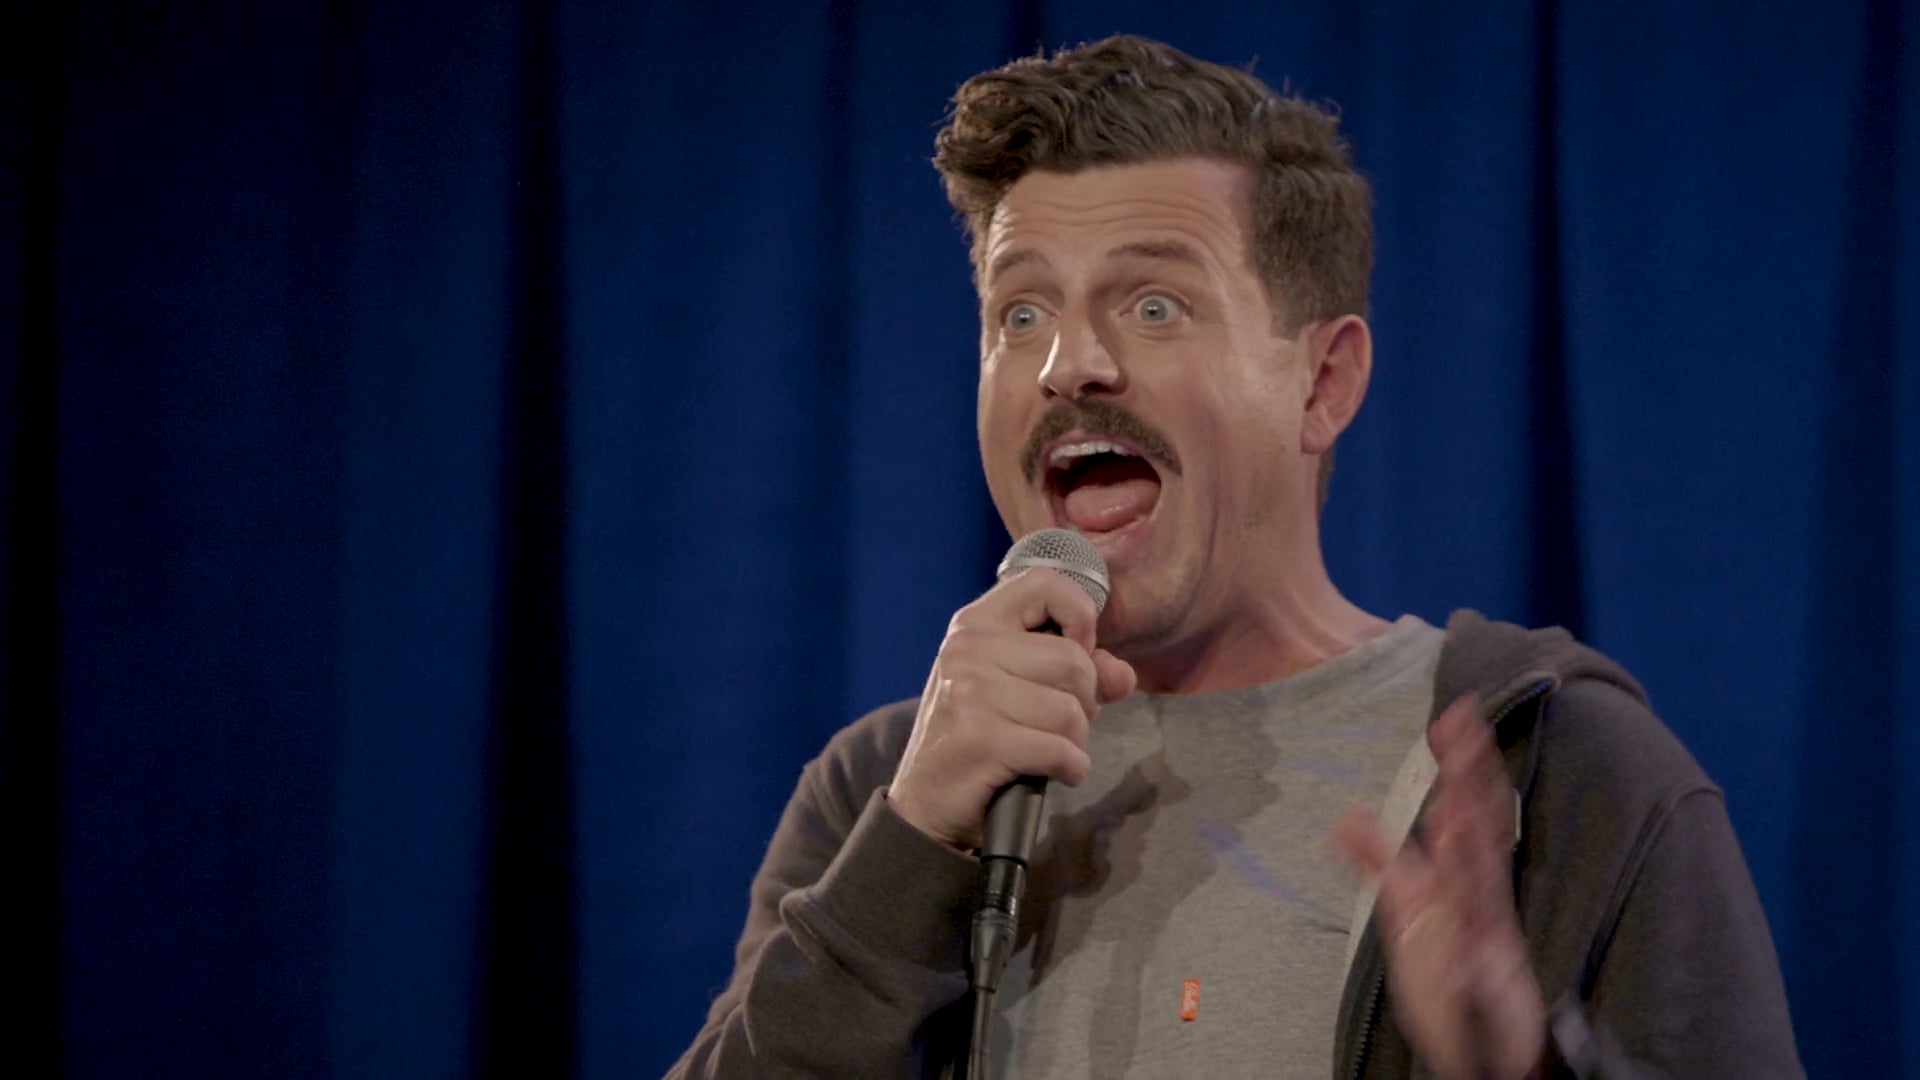 CHRIS FAIRBANKS-RESCUE CACTUS; A Stand Up Comedy Special (the Trailer) • DP - Michael Svitak